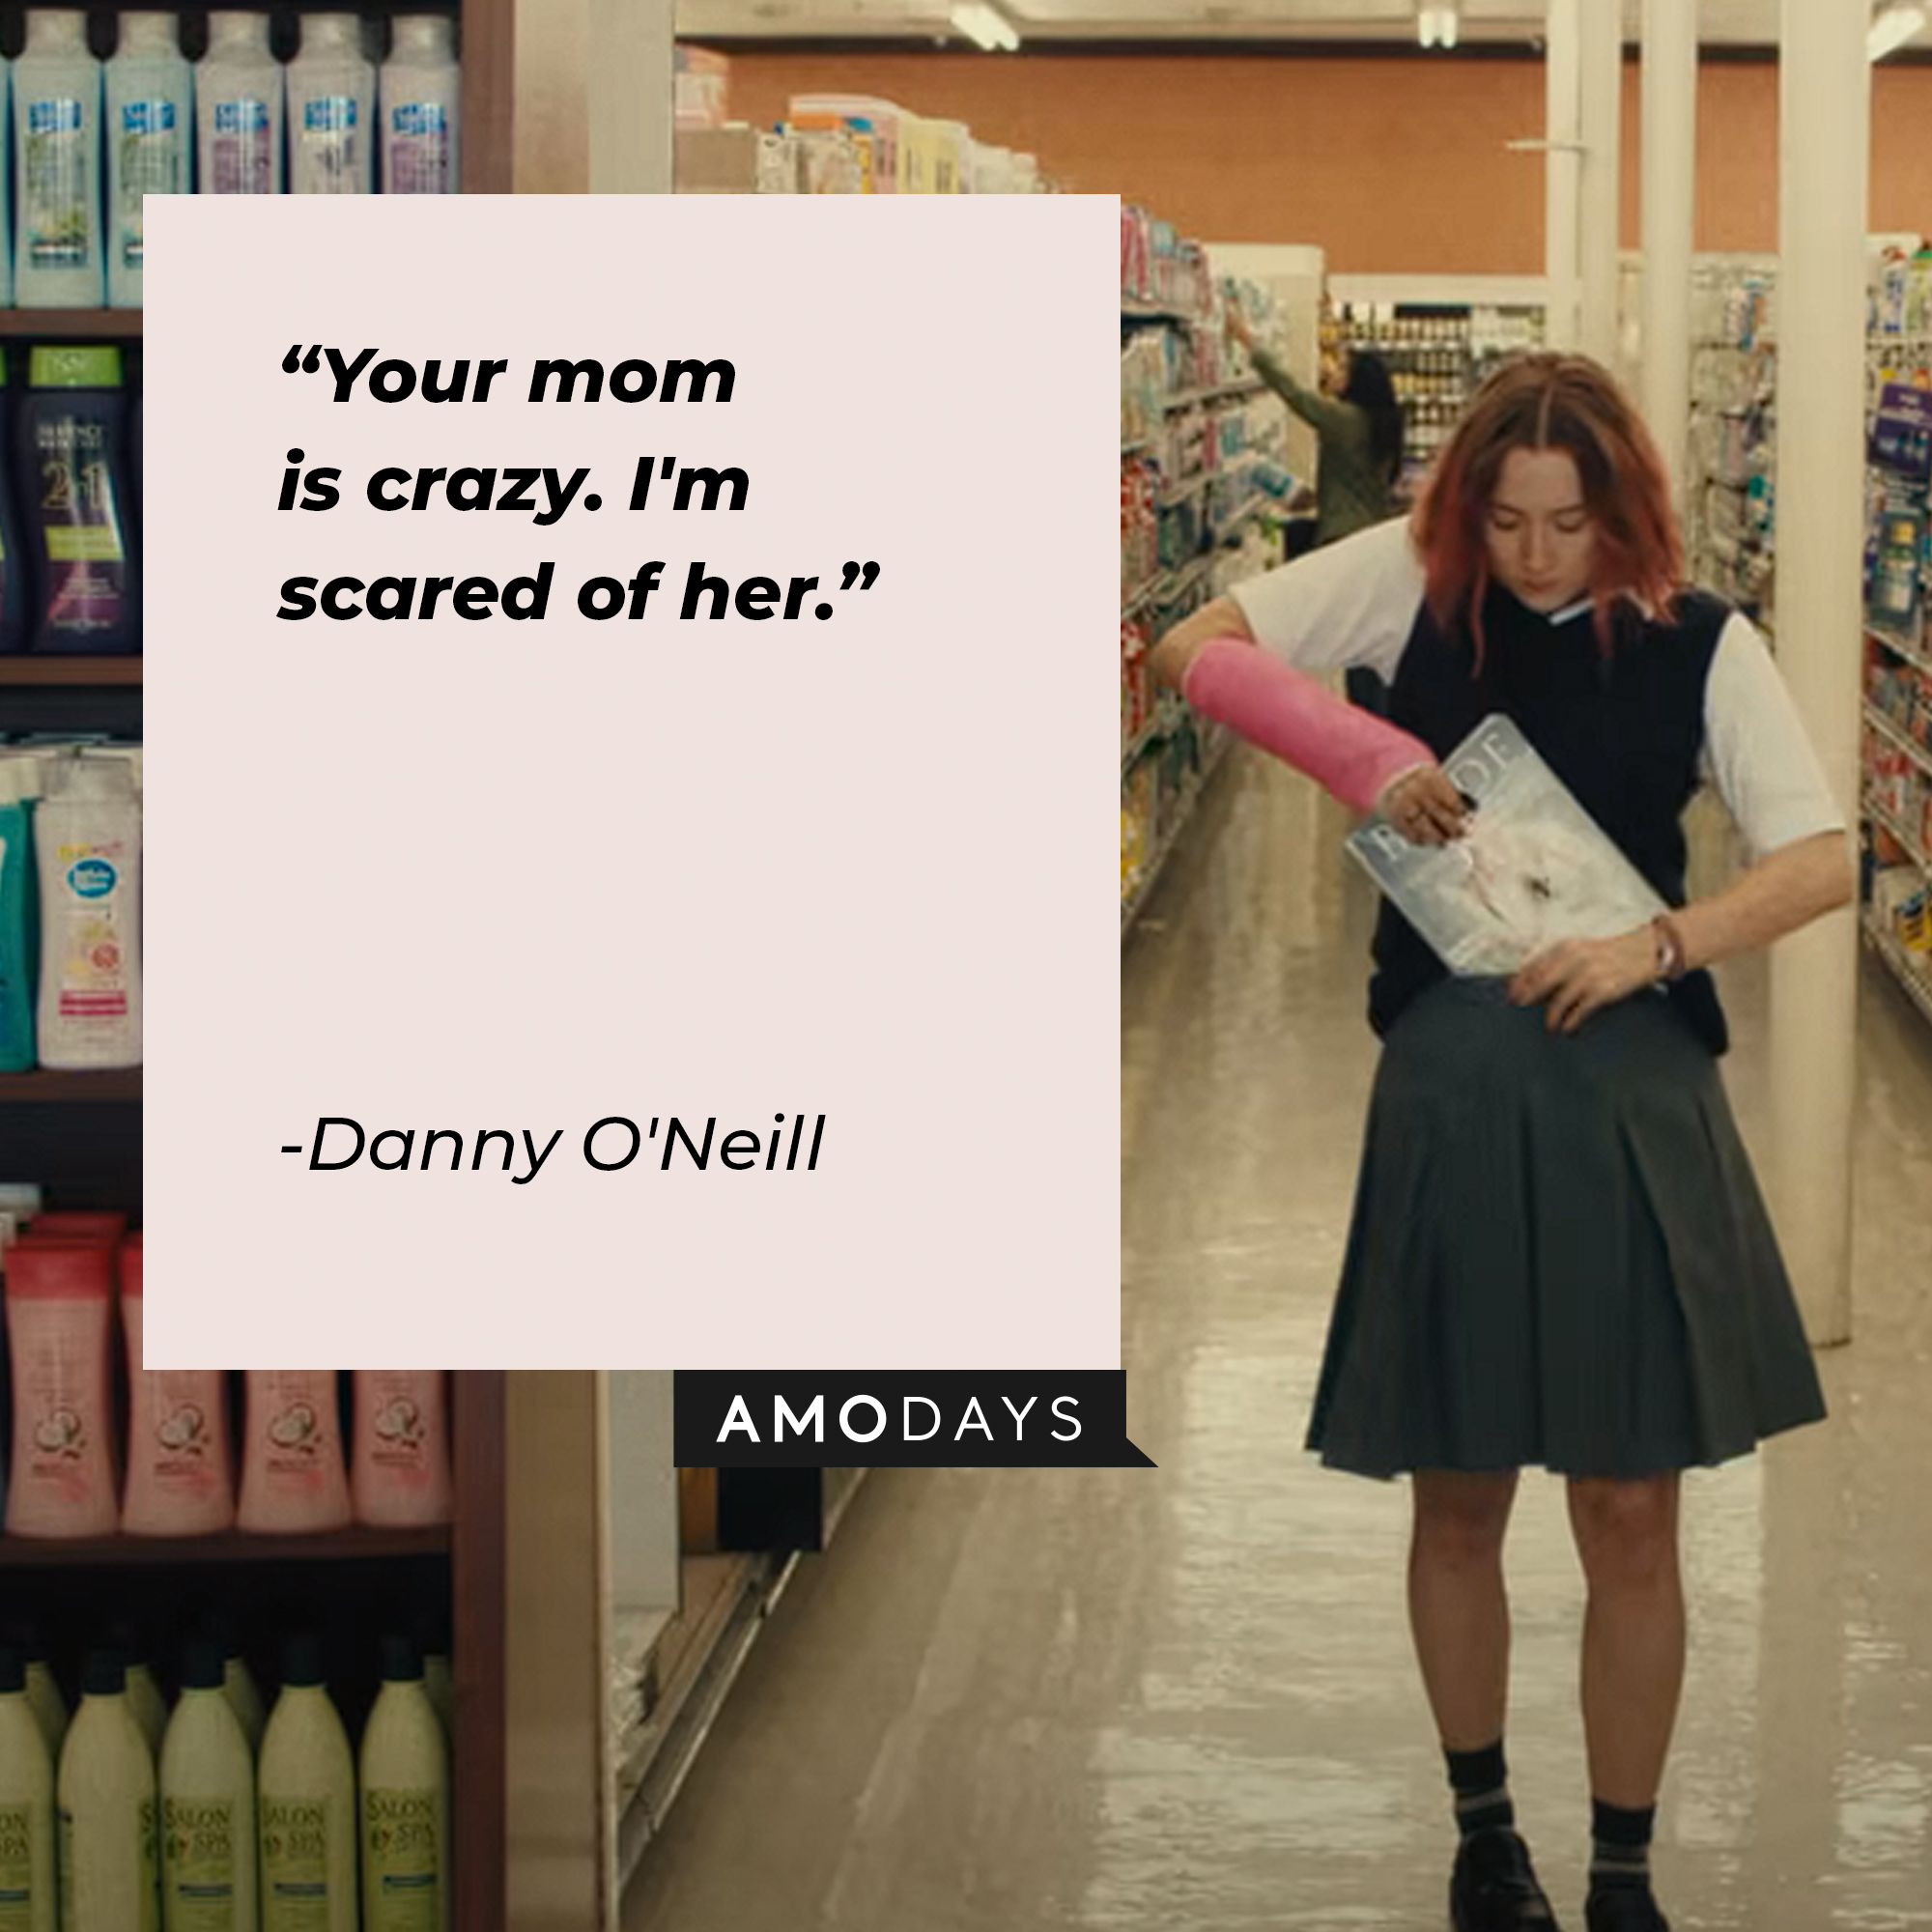 Danny O'Neill's quote: "Your mom is crazy. I'm scared of her." | Source: youtube.com/A24